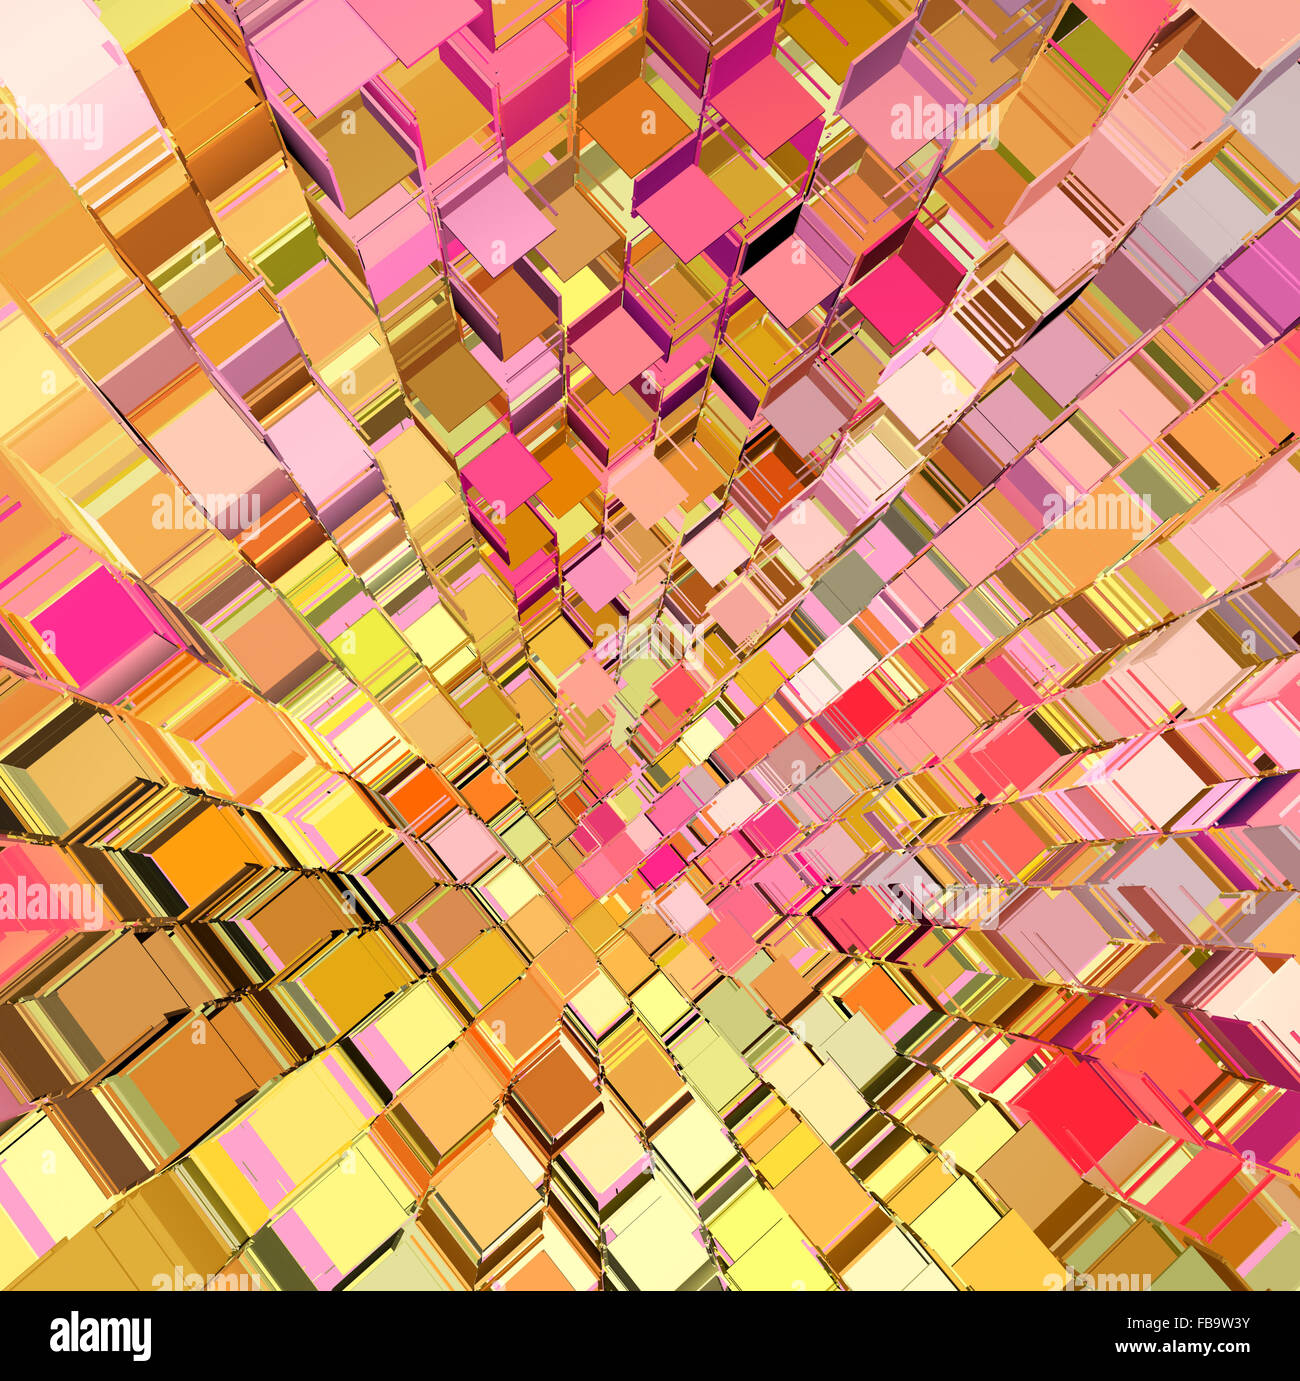 abstract fragmented cube pattern pink orange yellow backdrop Stock Photo